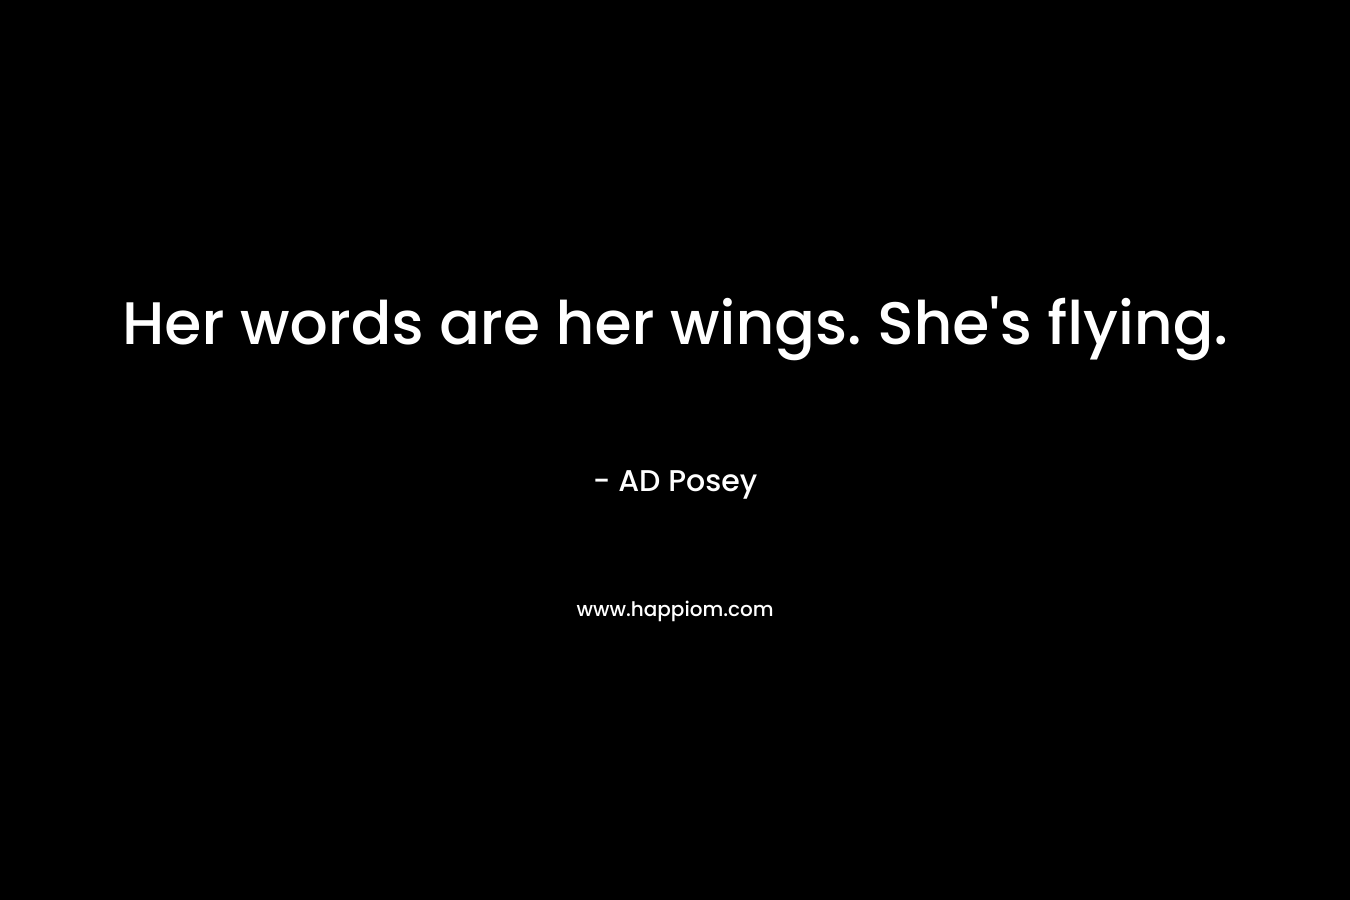 Her words are her wings. She's flying.